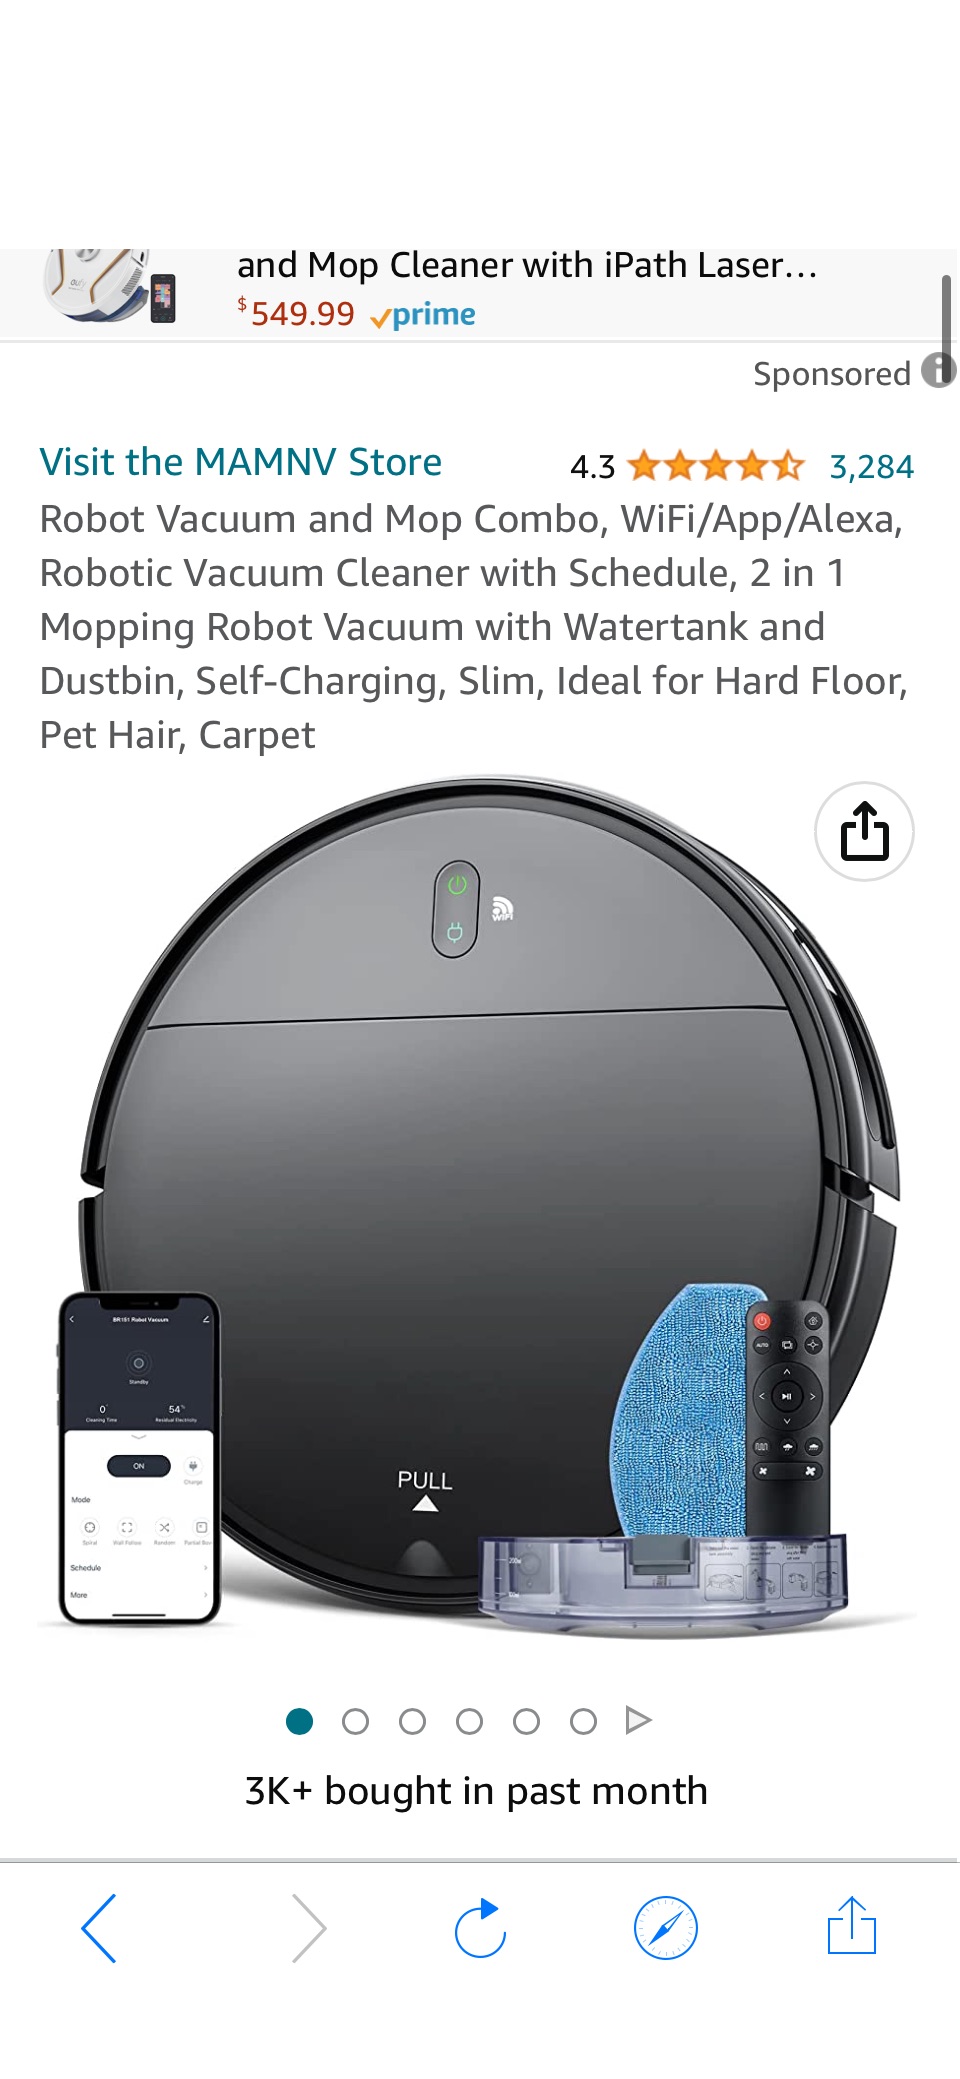 Amazon.com - Robot Vacuum and Mop Combo, WiFi/App/Alexa, Robotic Vacuum Cleaner with Schedule, 2 in 1 Mopping Robot Vacuum with Watertank and-原价404